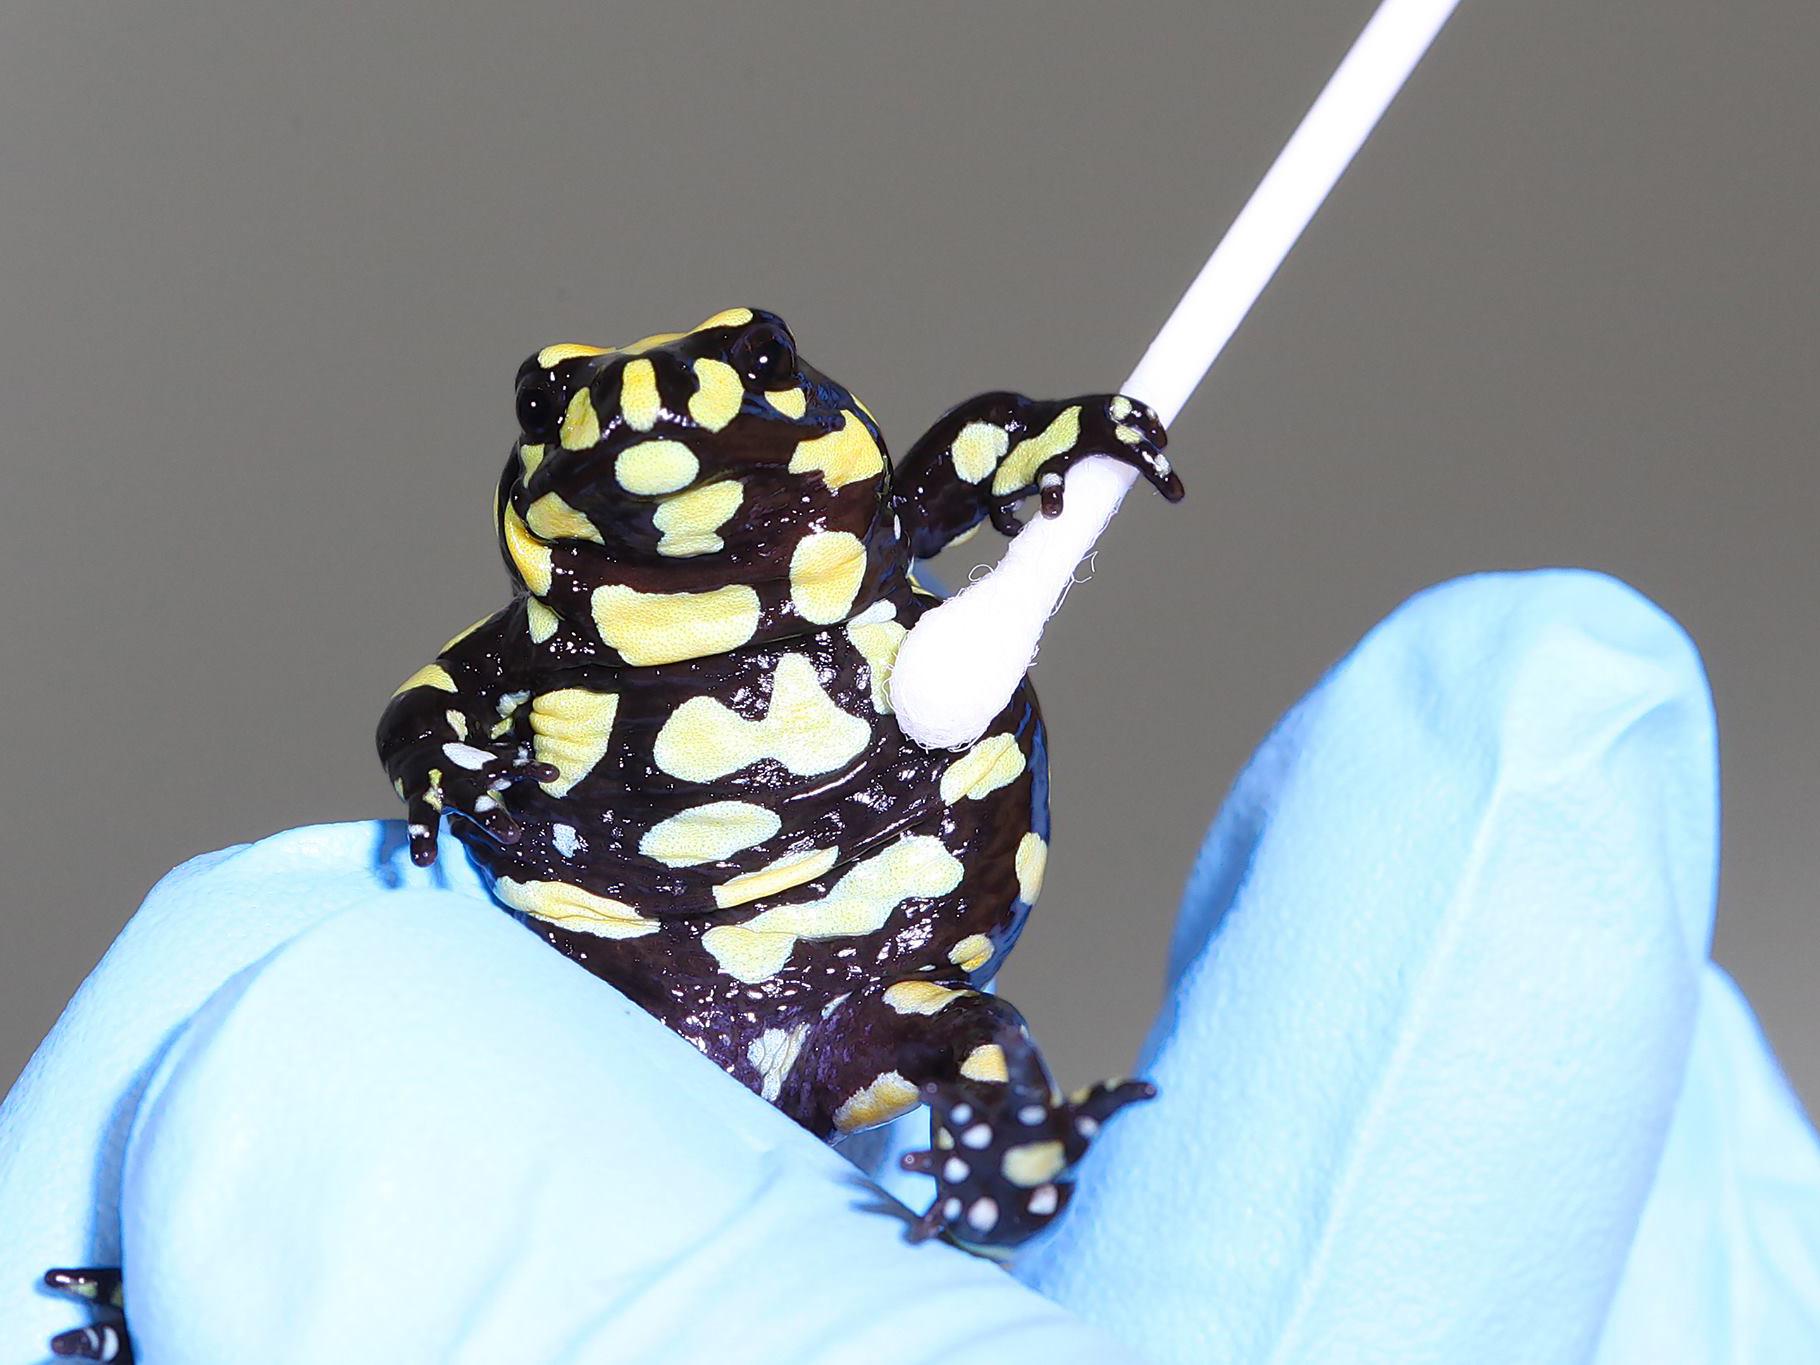 Corroboree frog getting tested for chytrid fungus by scientists